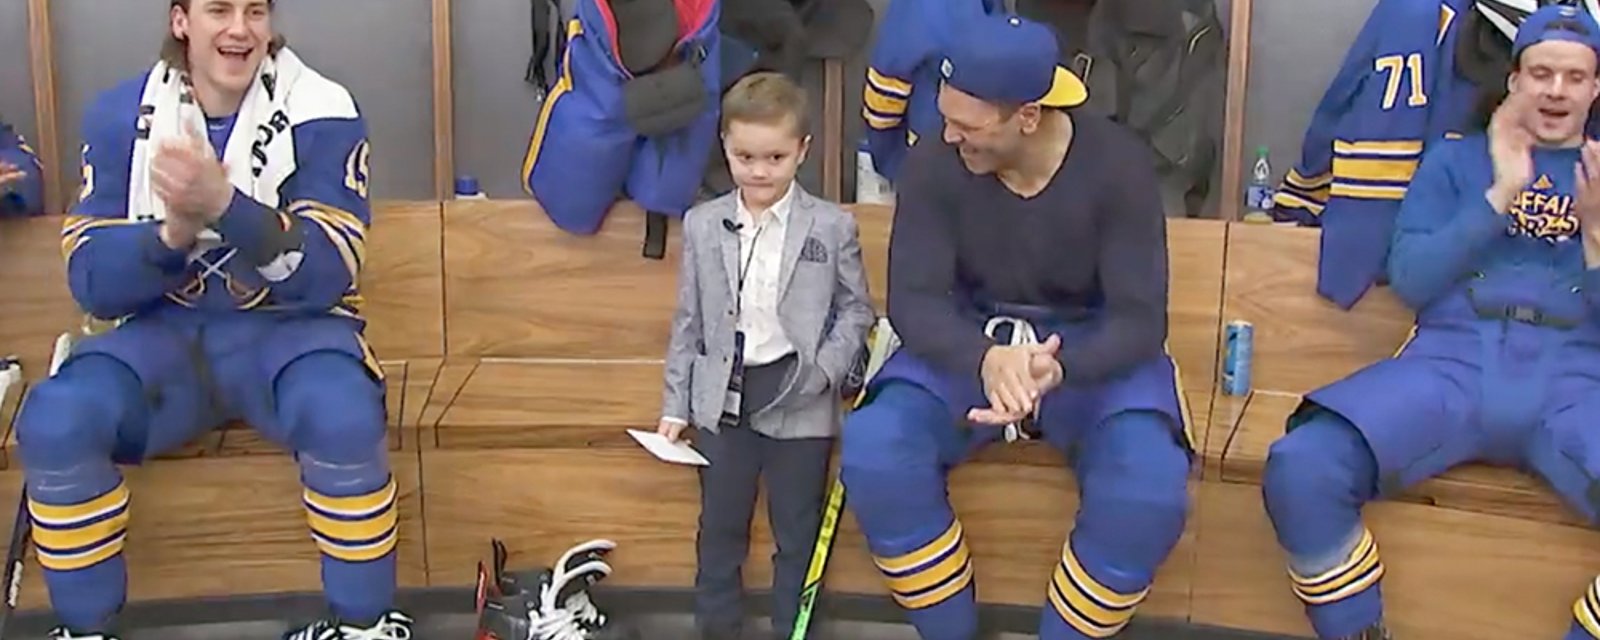 Kyle Okposo's son fires up the Sabres with pre-game speech and starting lineup announcement